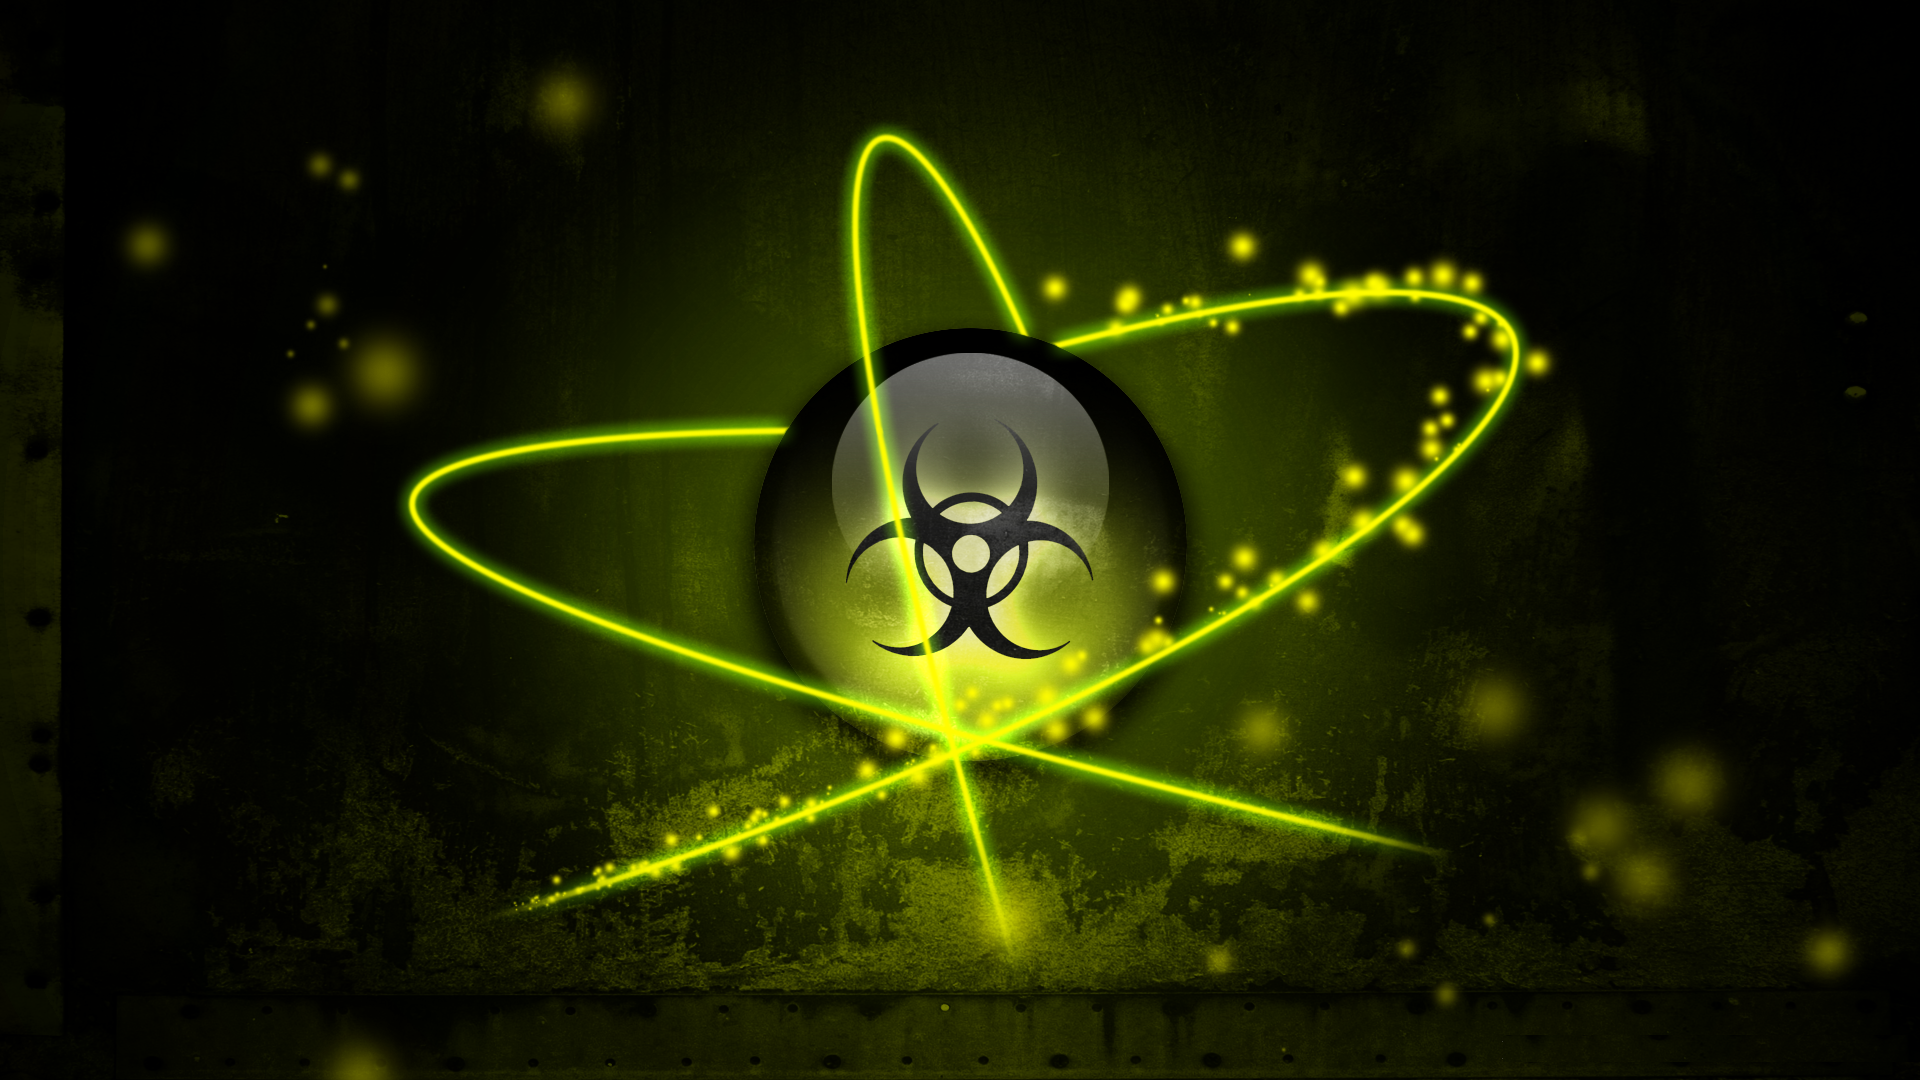 What Is The Symbol Of Biohazard